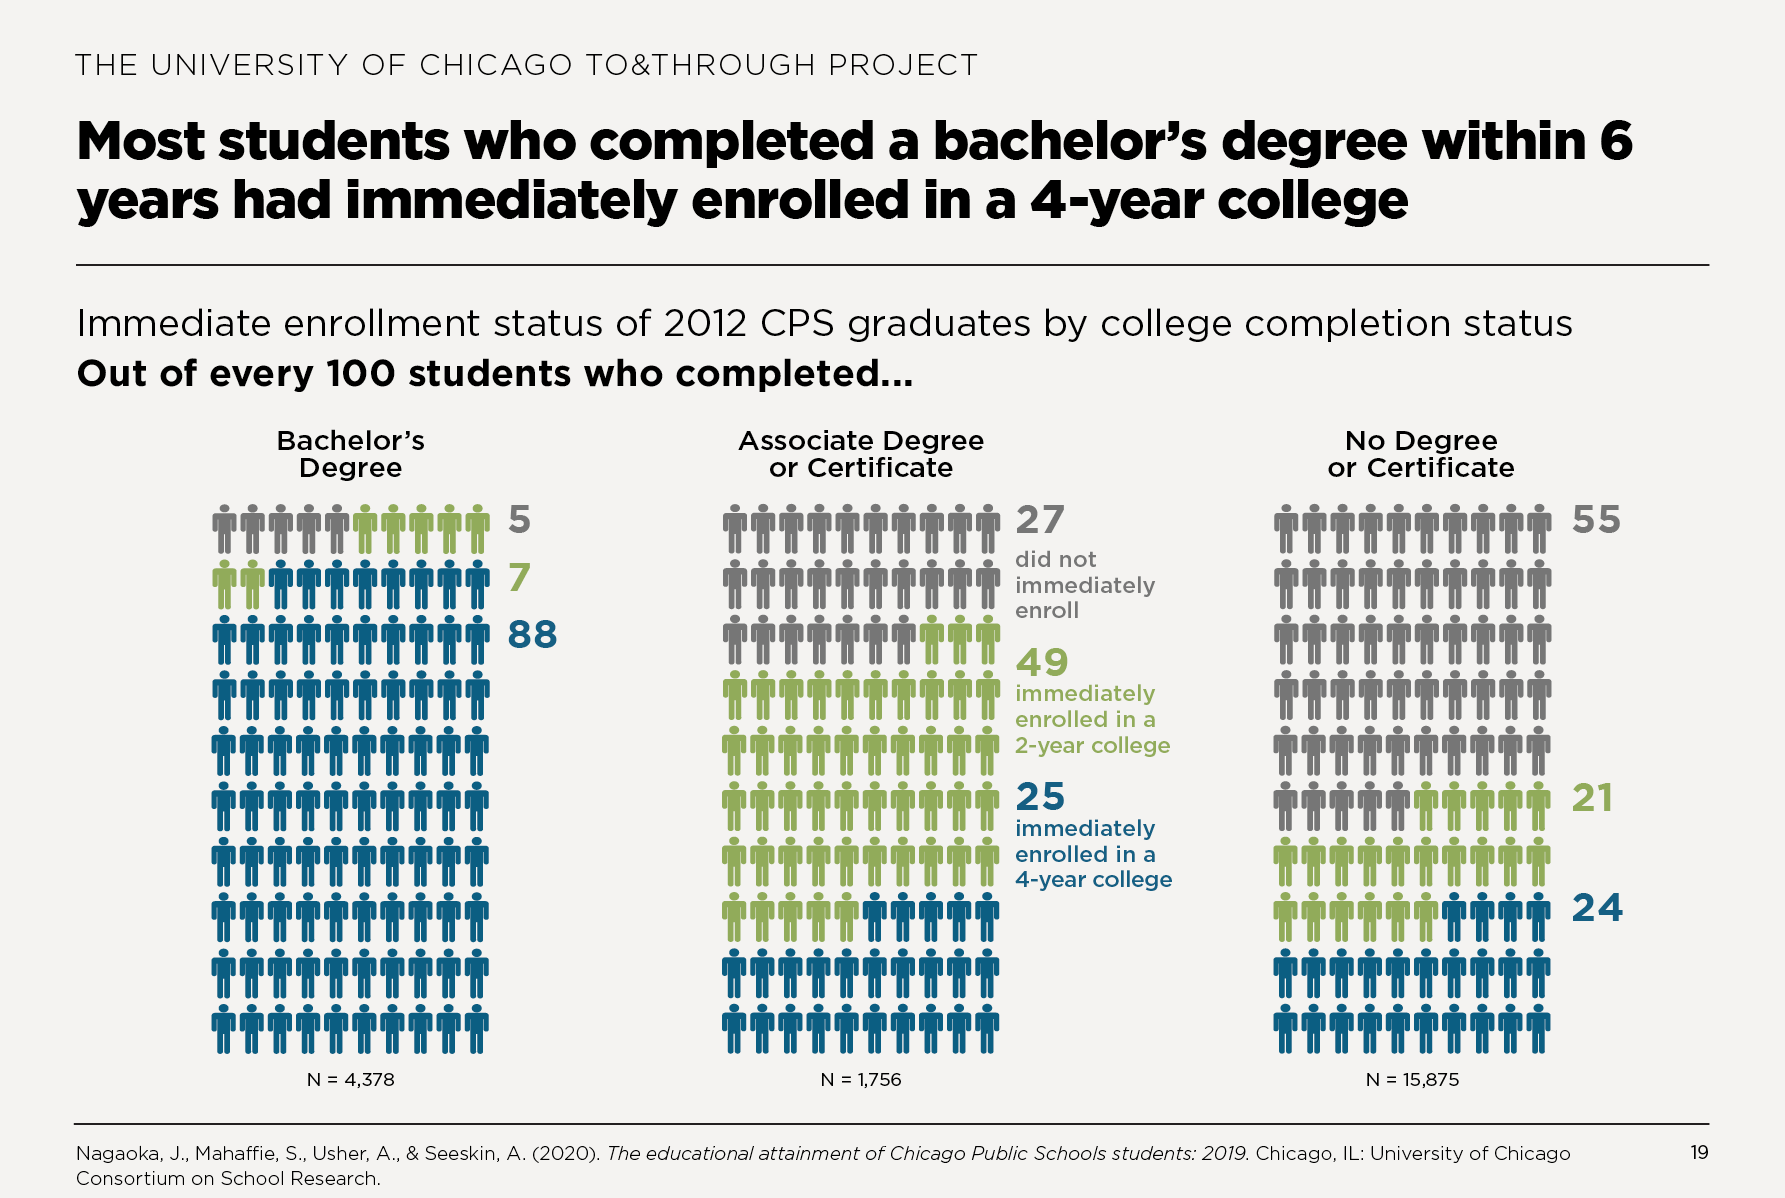 Most students who completed a bachelor’s degree within 6 years had immediately enrolled in a 4-year college